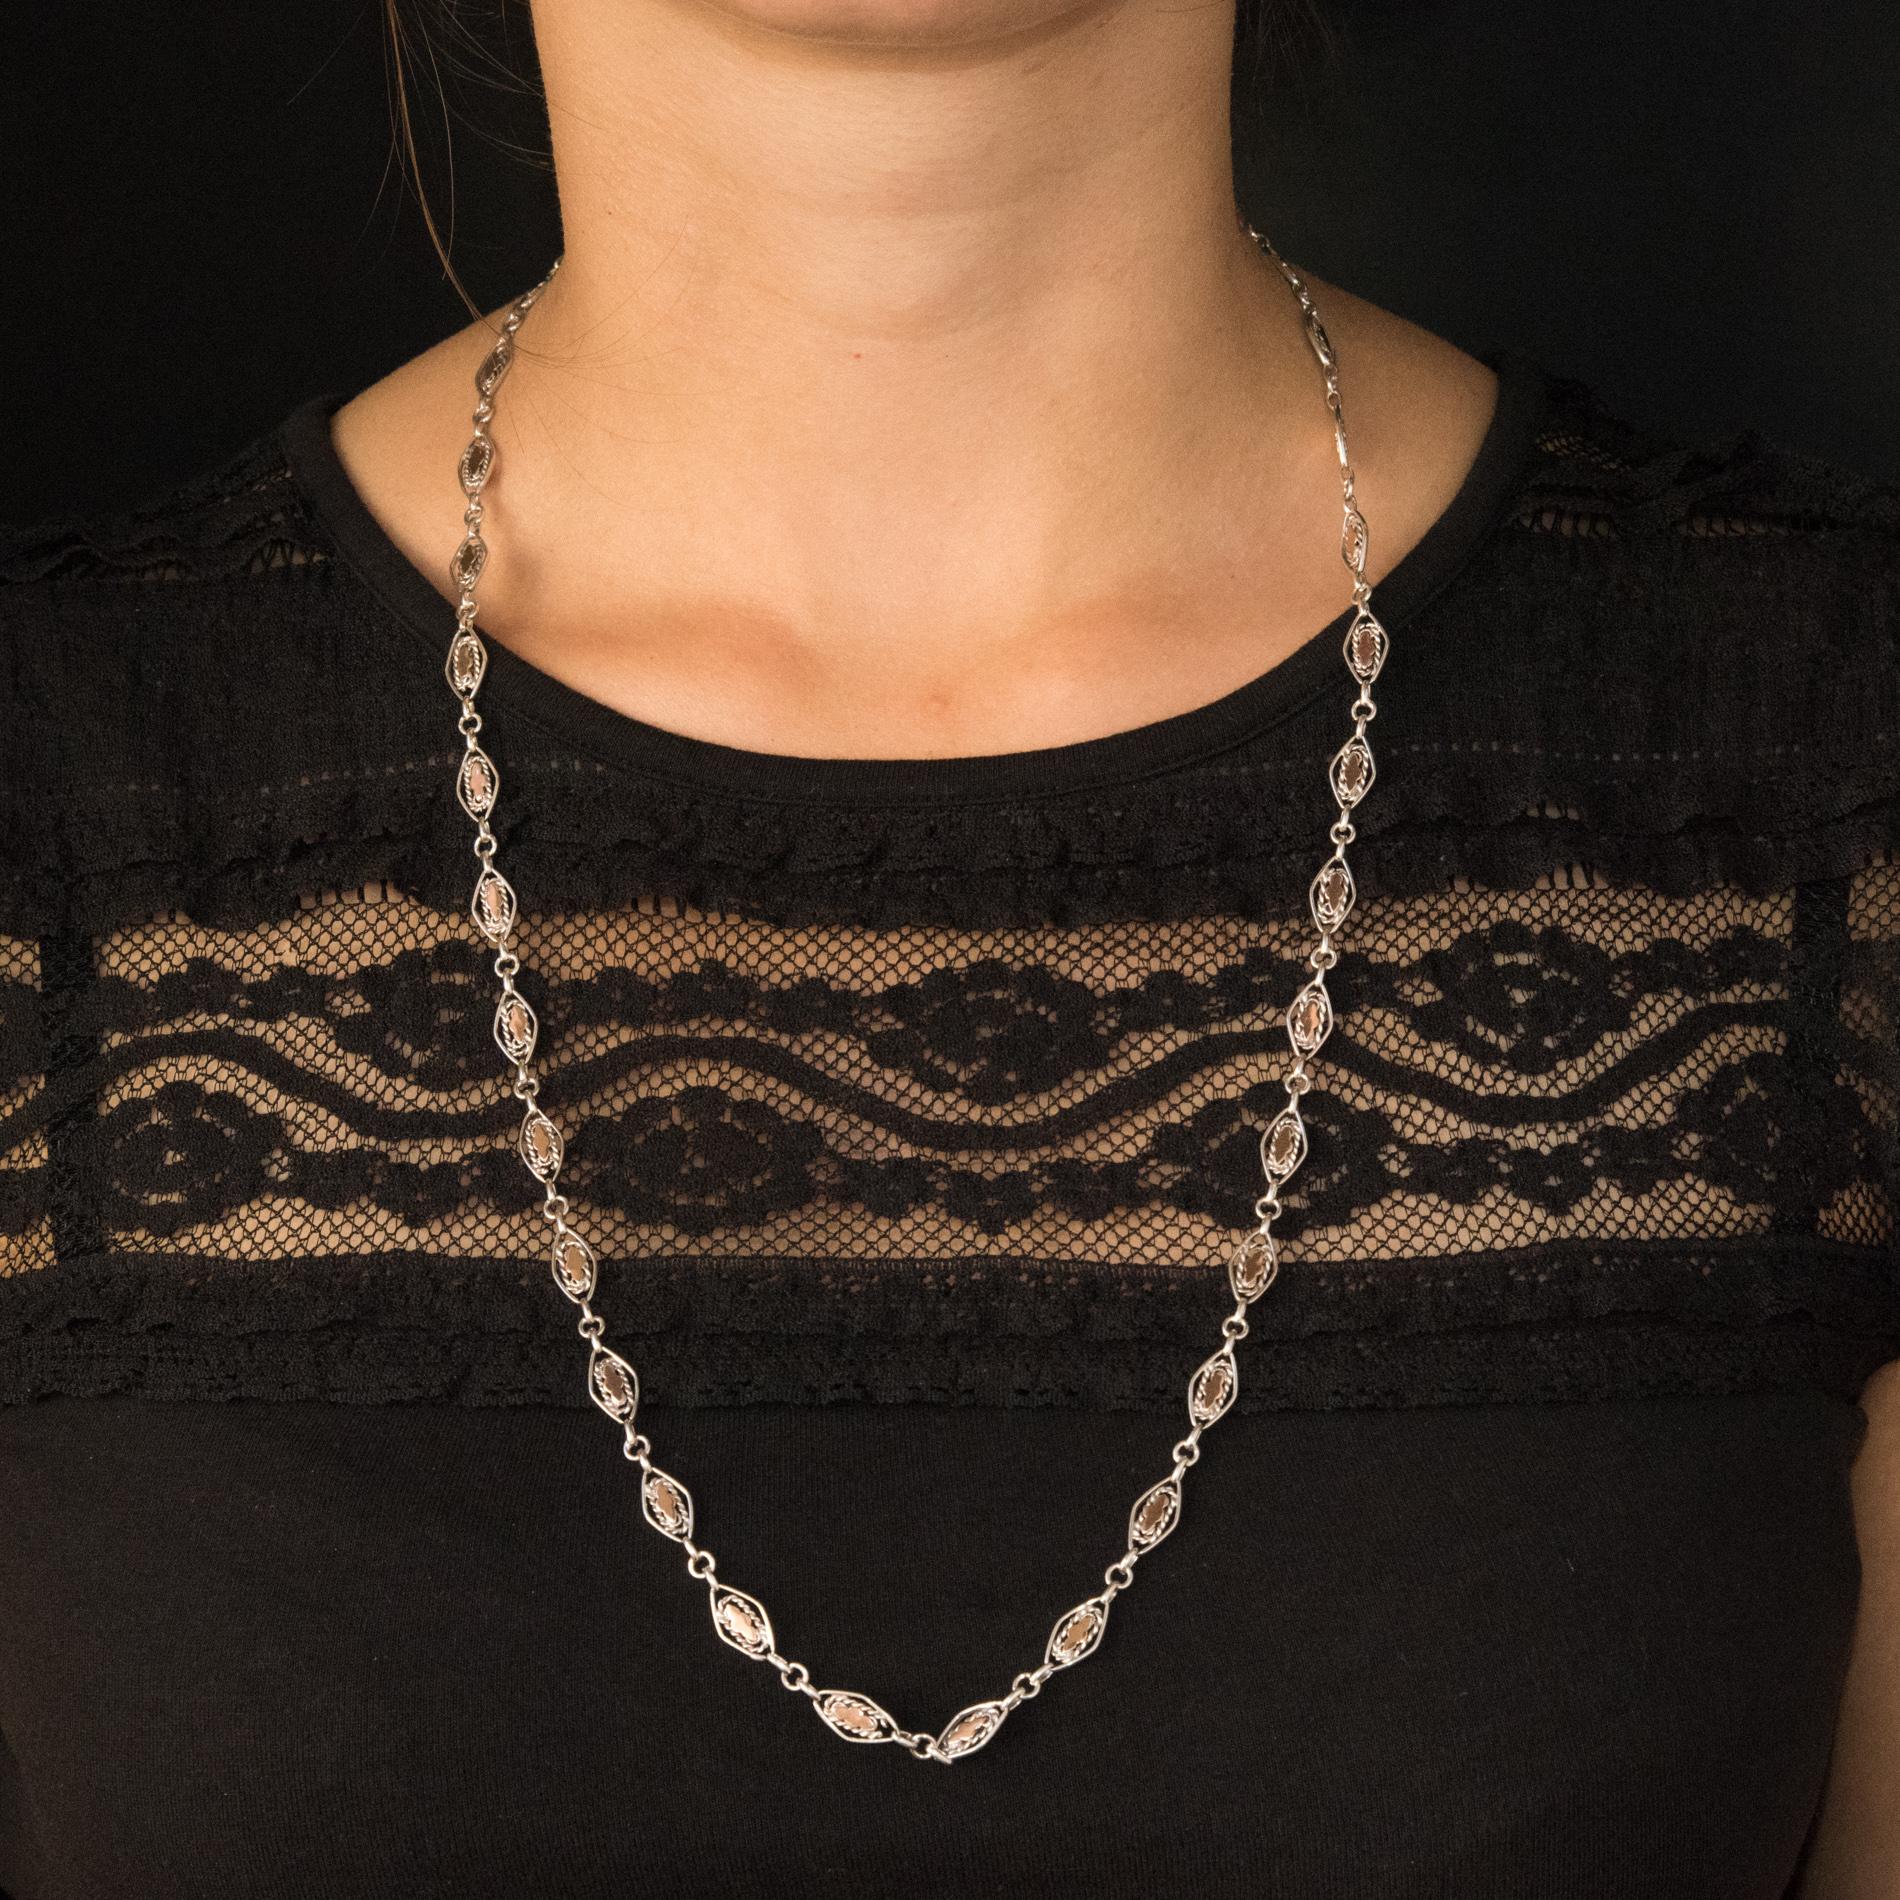 Necklace in silver, boar head's hallmark, and 18 karats rose gold.
Lovely antique silver necklace, it is formed of lozenge links decorated with twists and set in the center of each of a pink gold pattern. Each link is separated from the others by 3